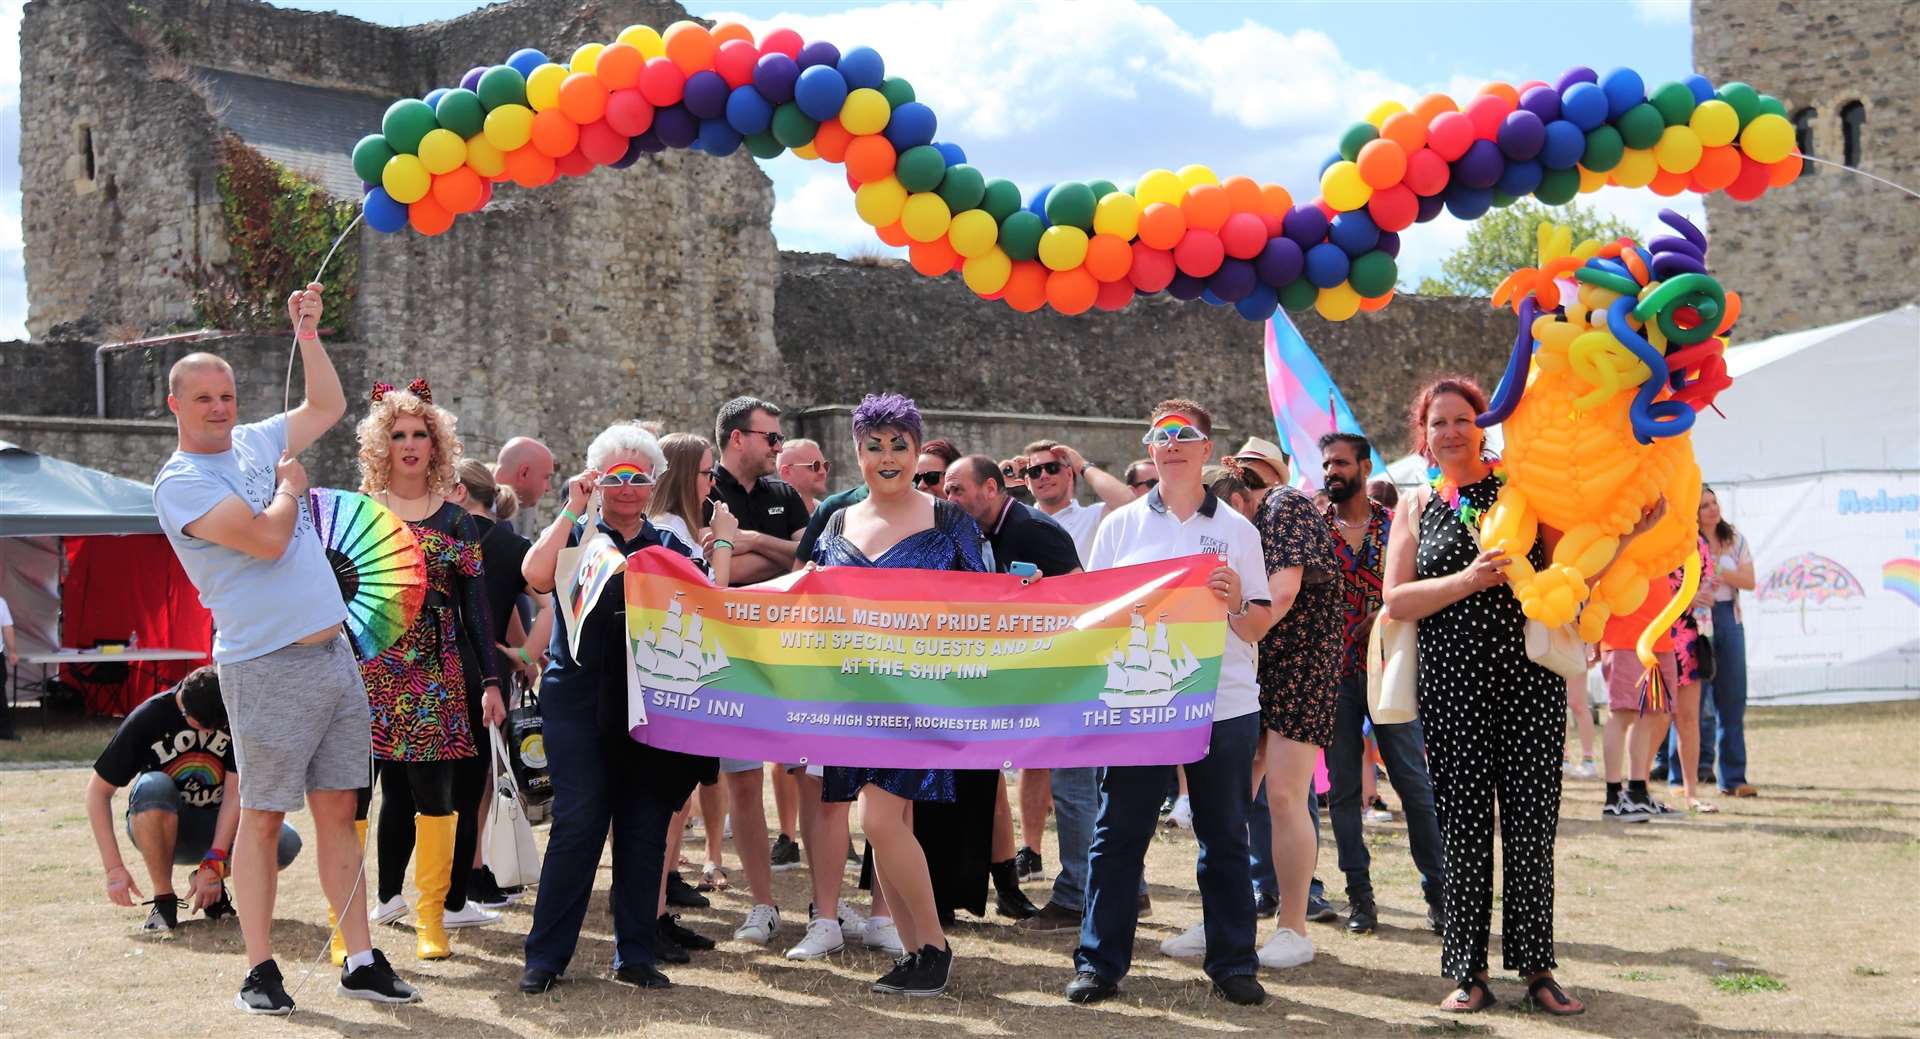 Pride festival and parade in Medway